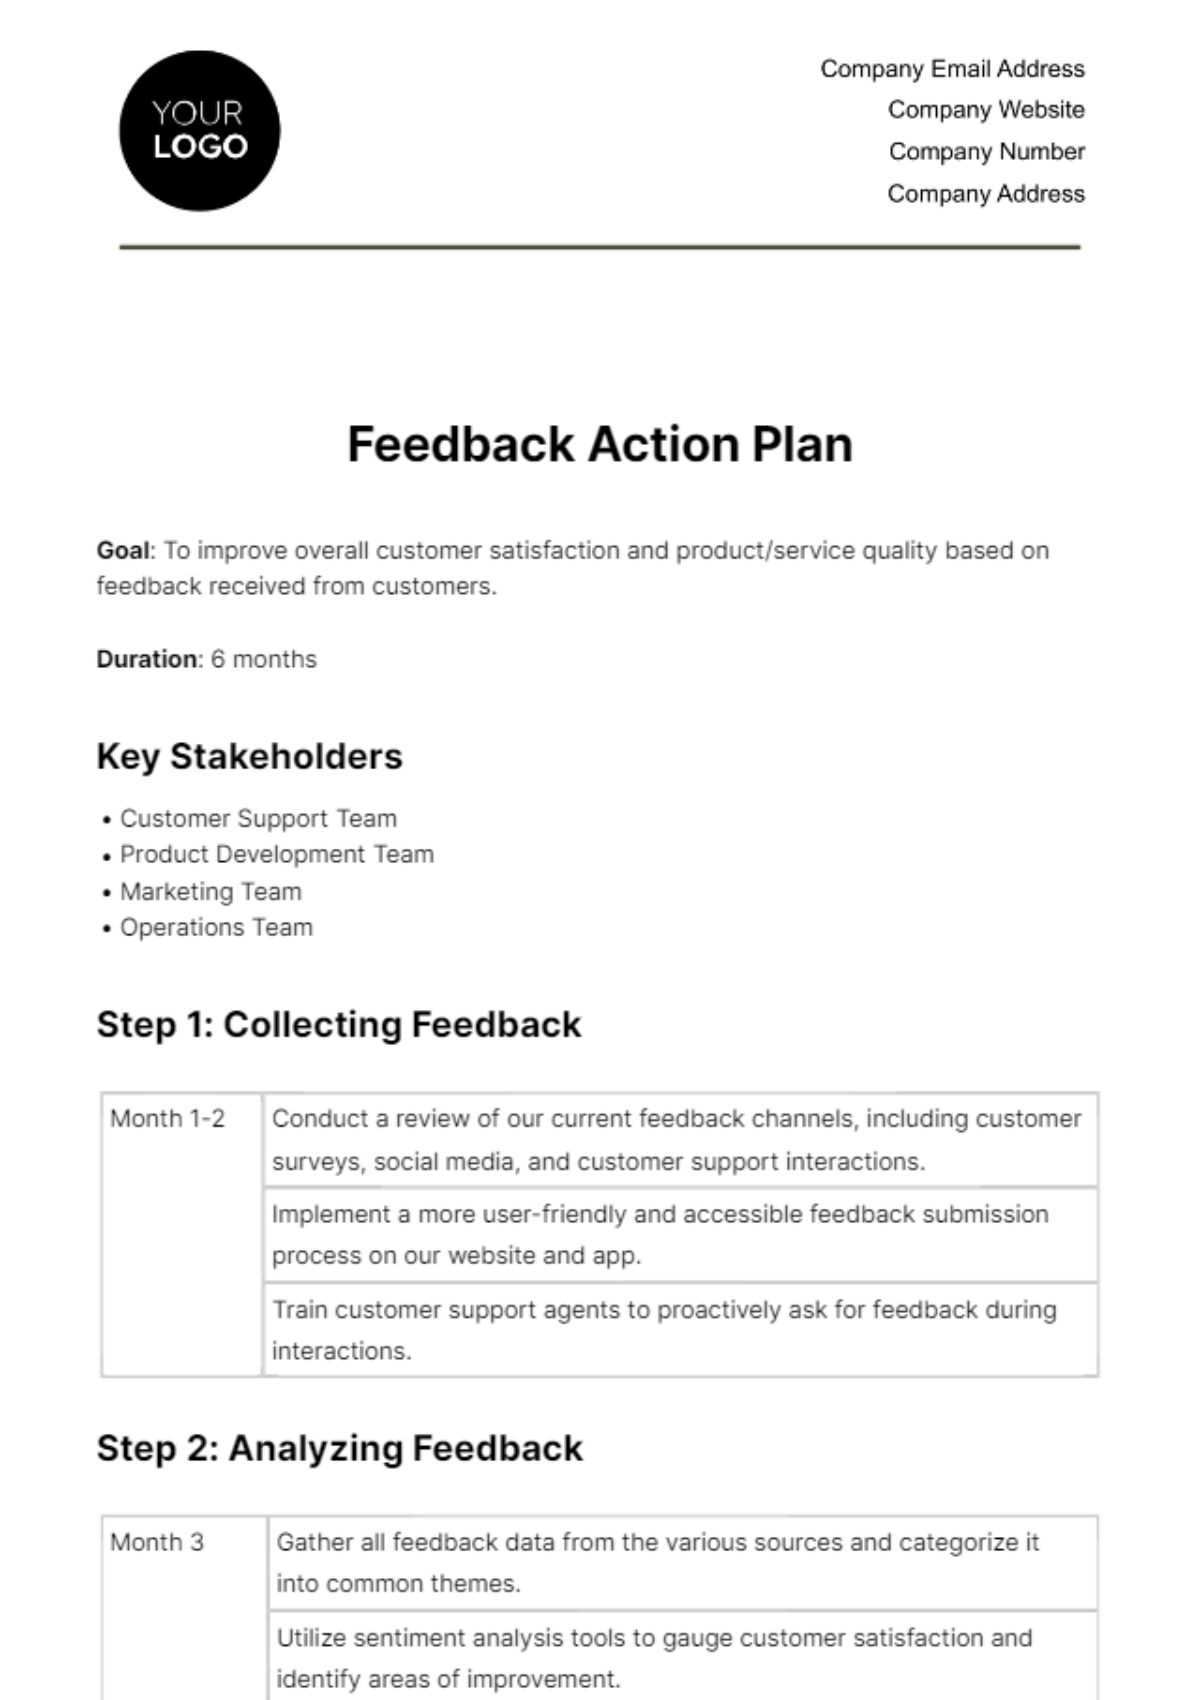 Free Feedback Action Plan HR Template